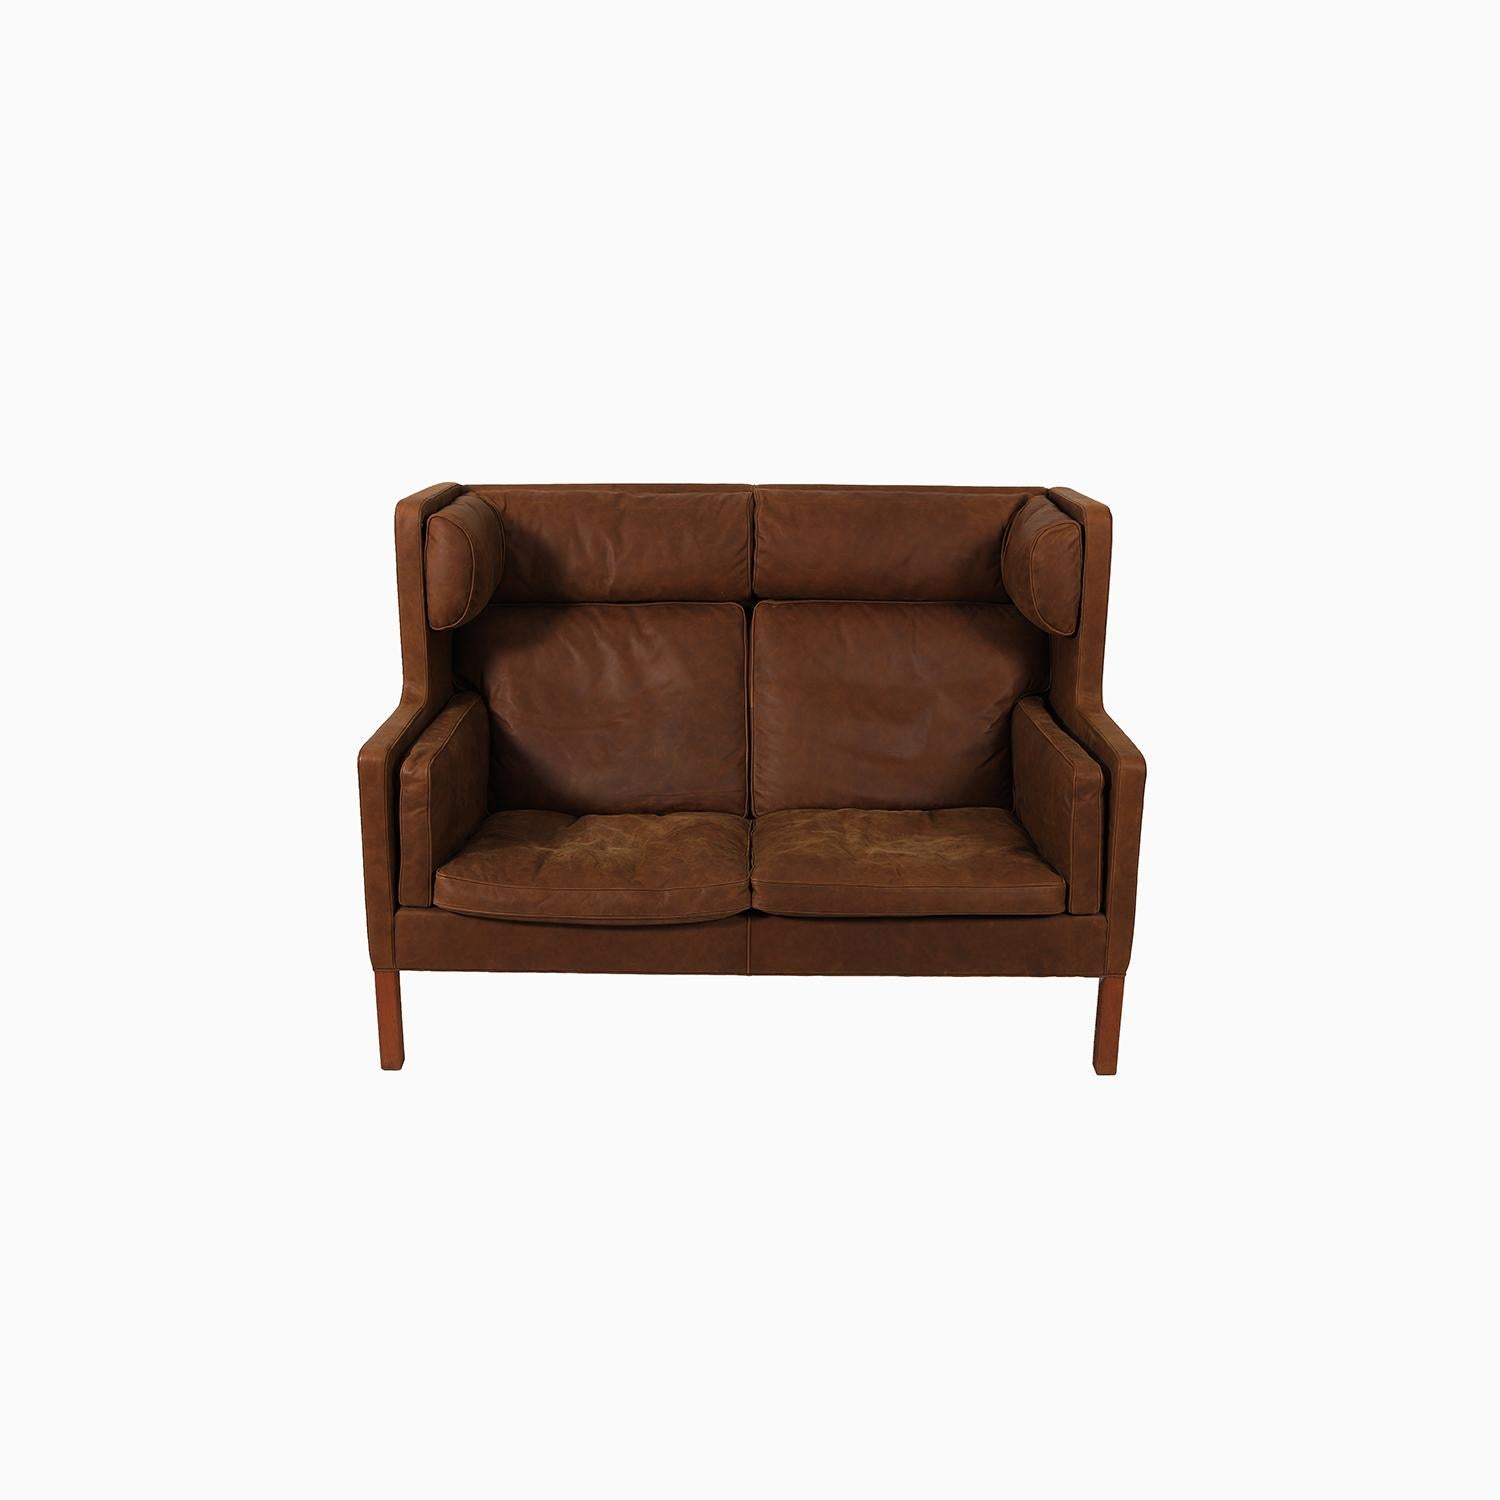 Melt into this extremely comfortable two seat sofa designed by Borge Mogensen for Fredericia furniture. Known as the Kupe sofa. This two seater was recently restored in a soft supple leather with down feather inserts. A perfect place to find